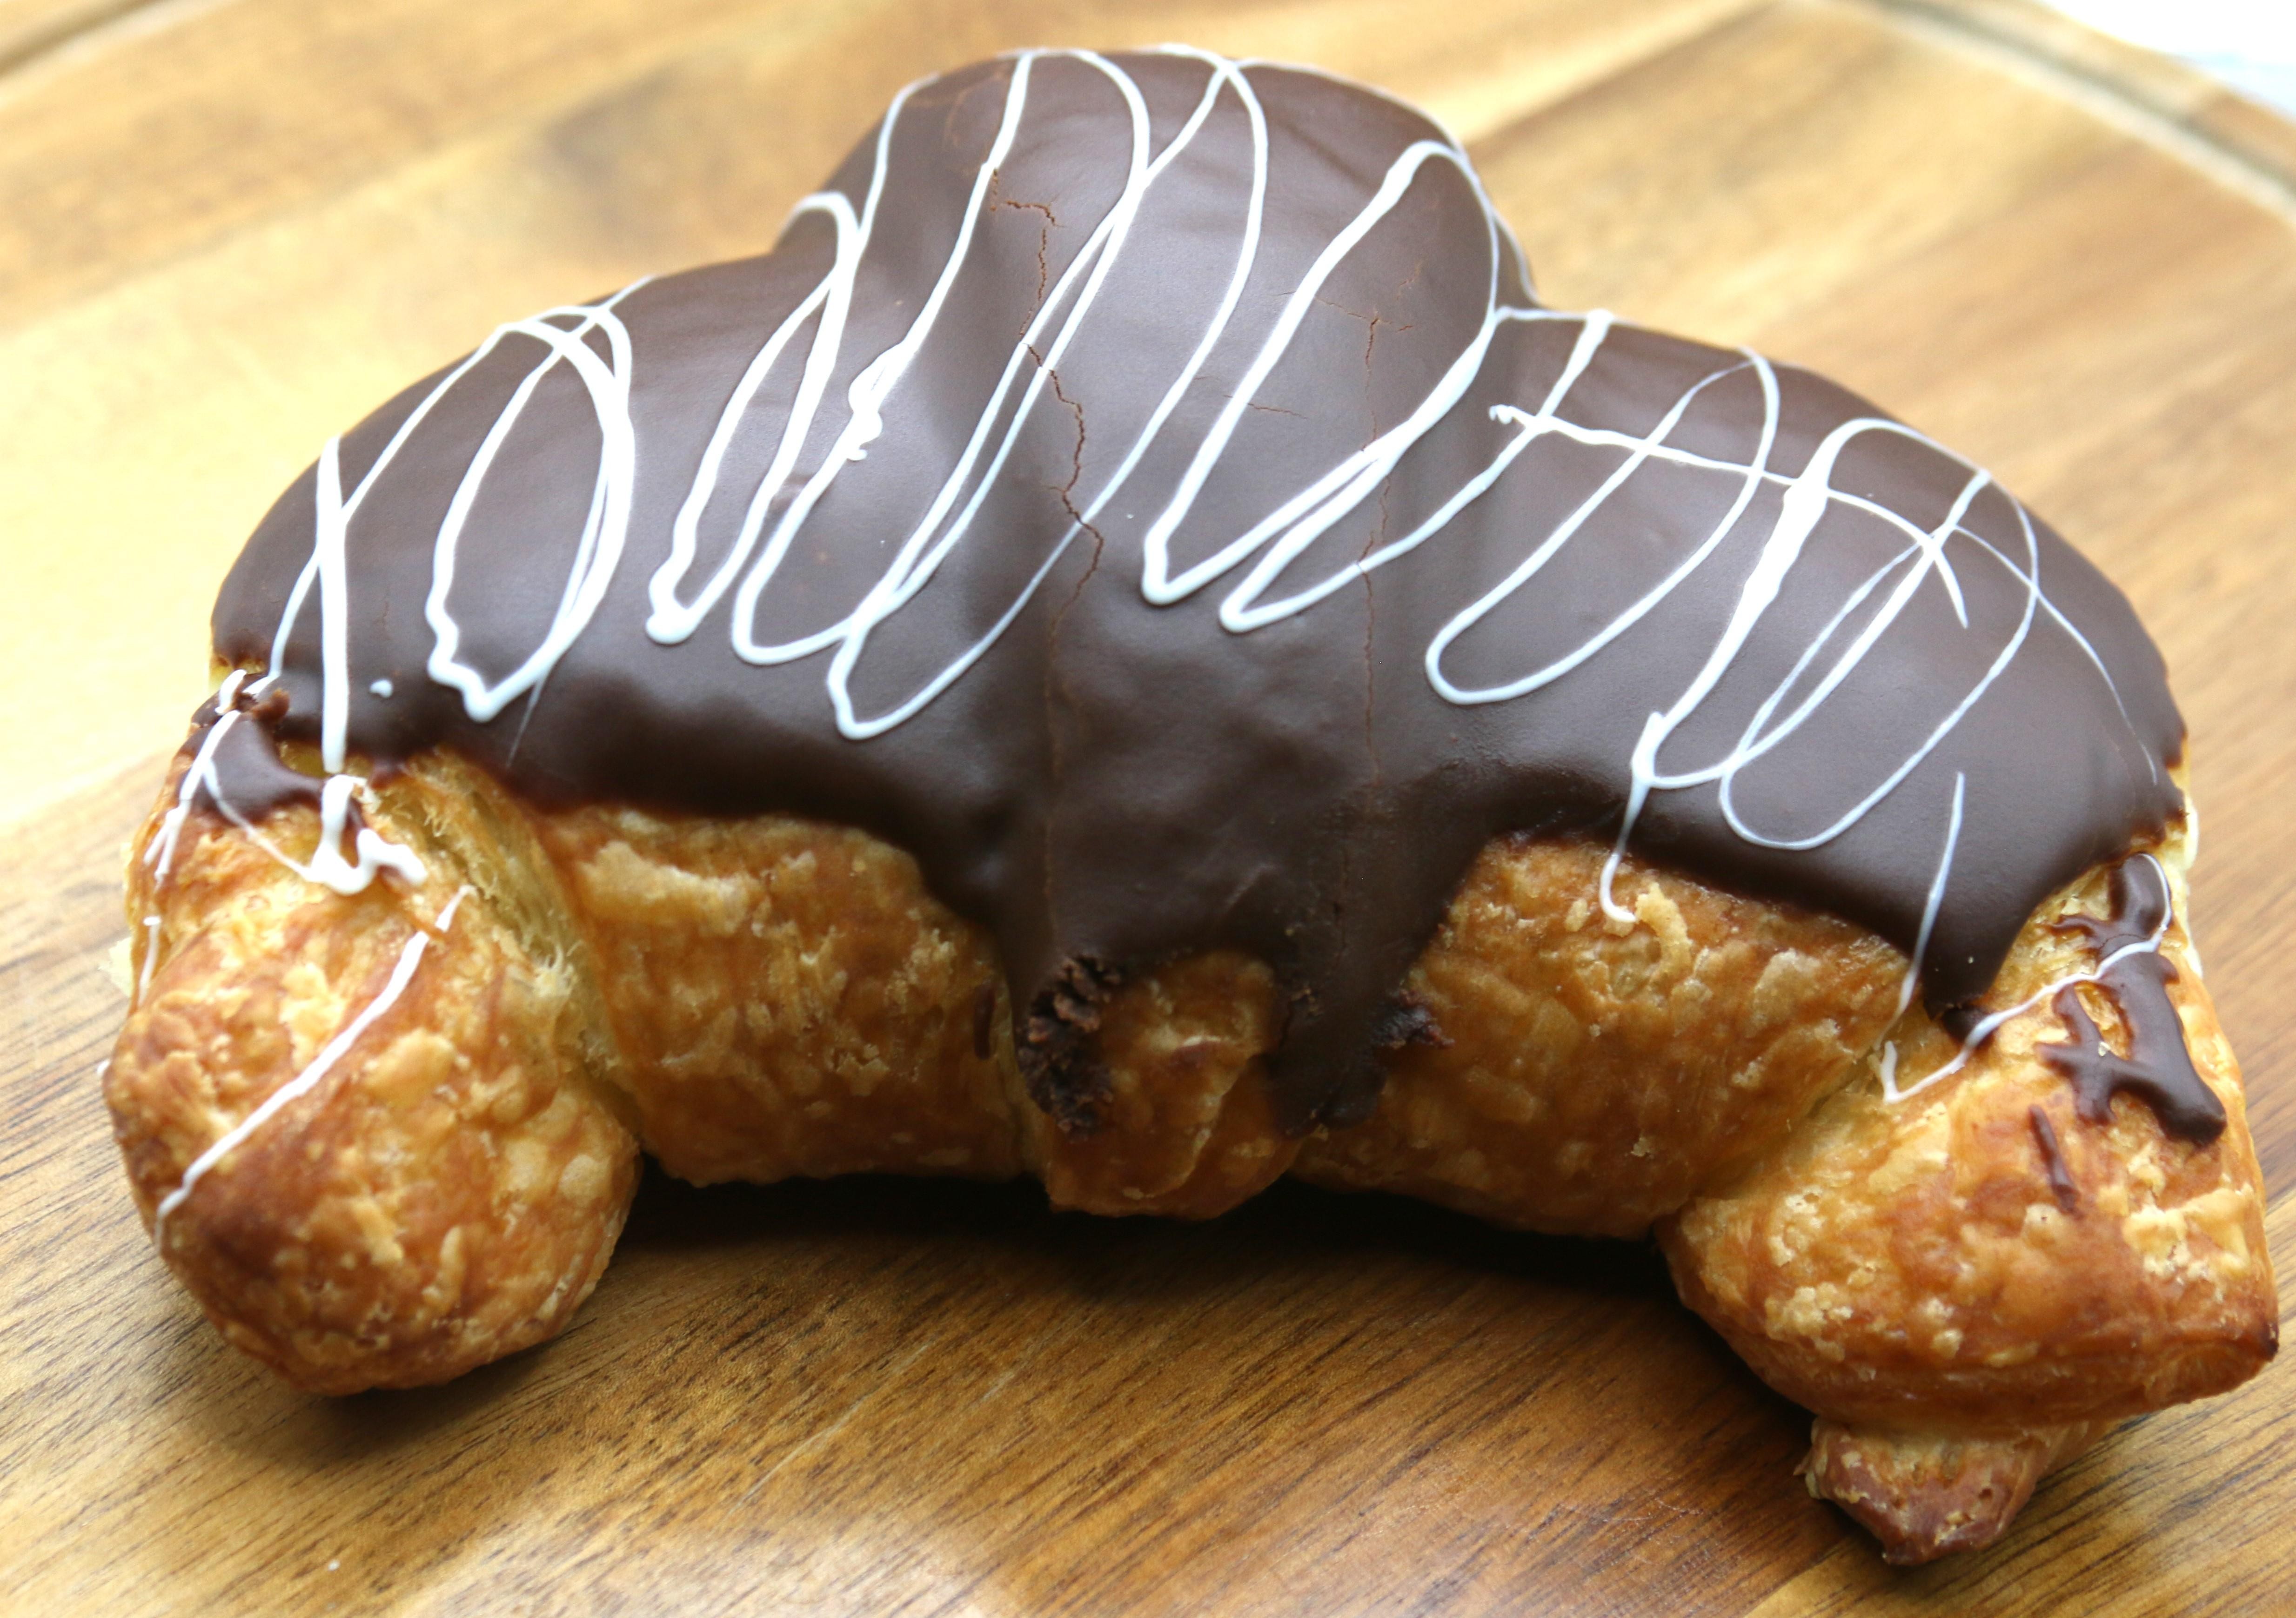 Chocolate Croissant with Chocolate Filling